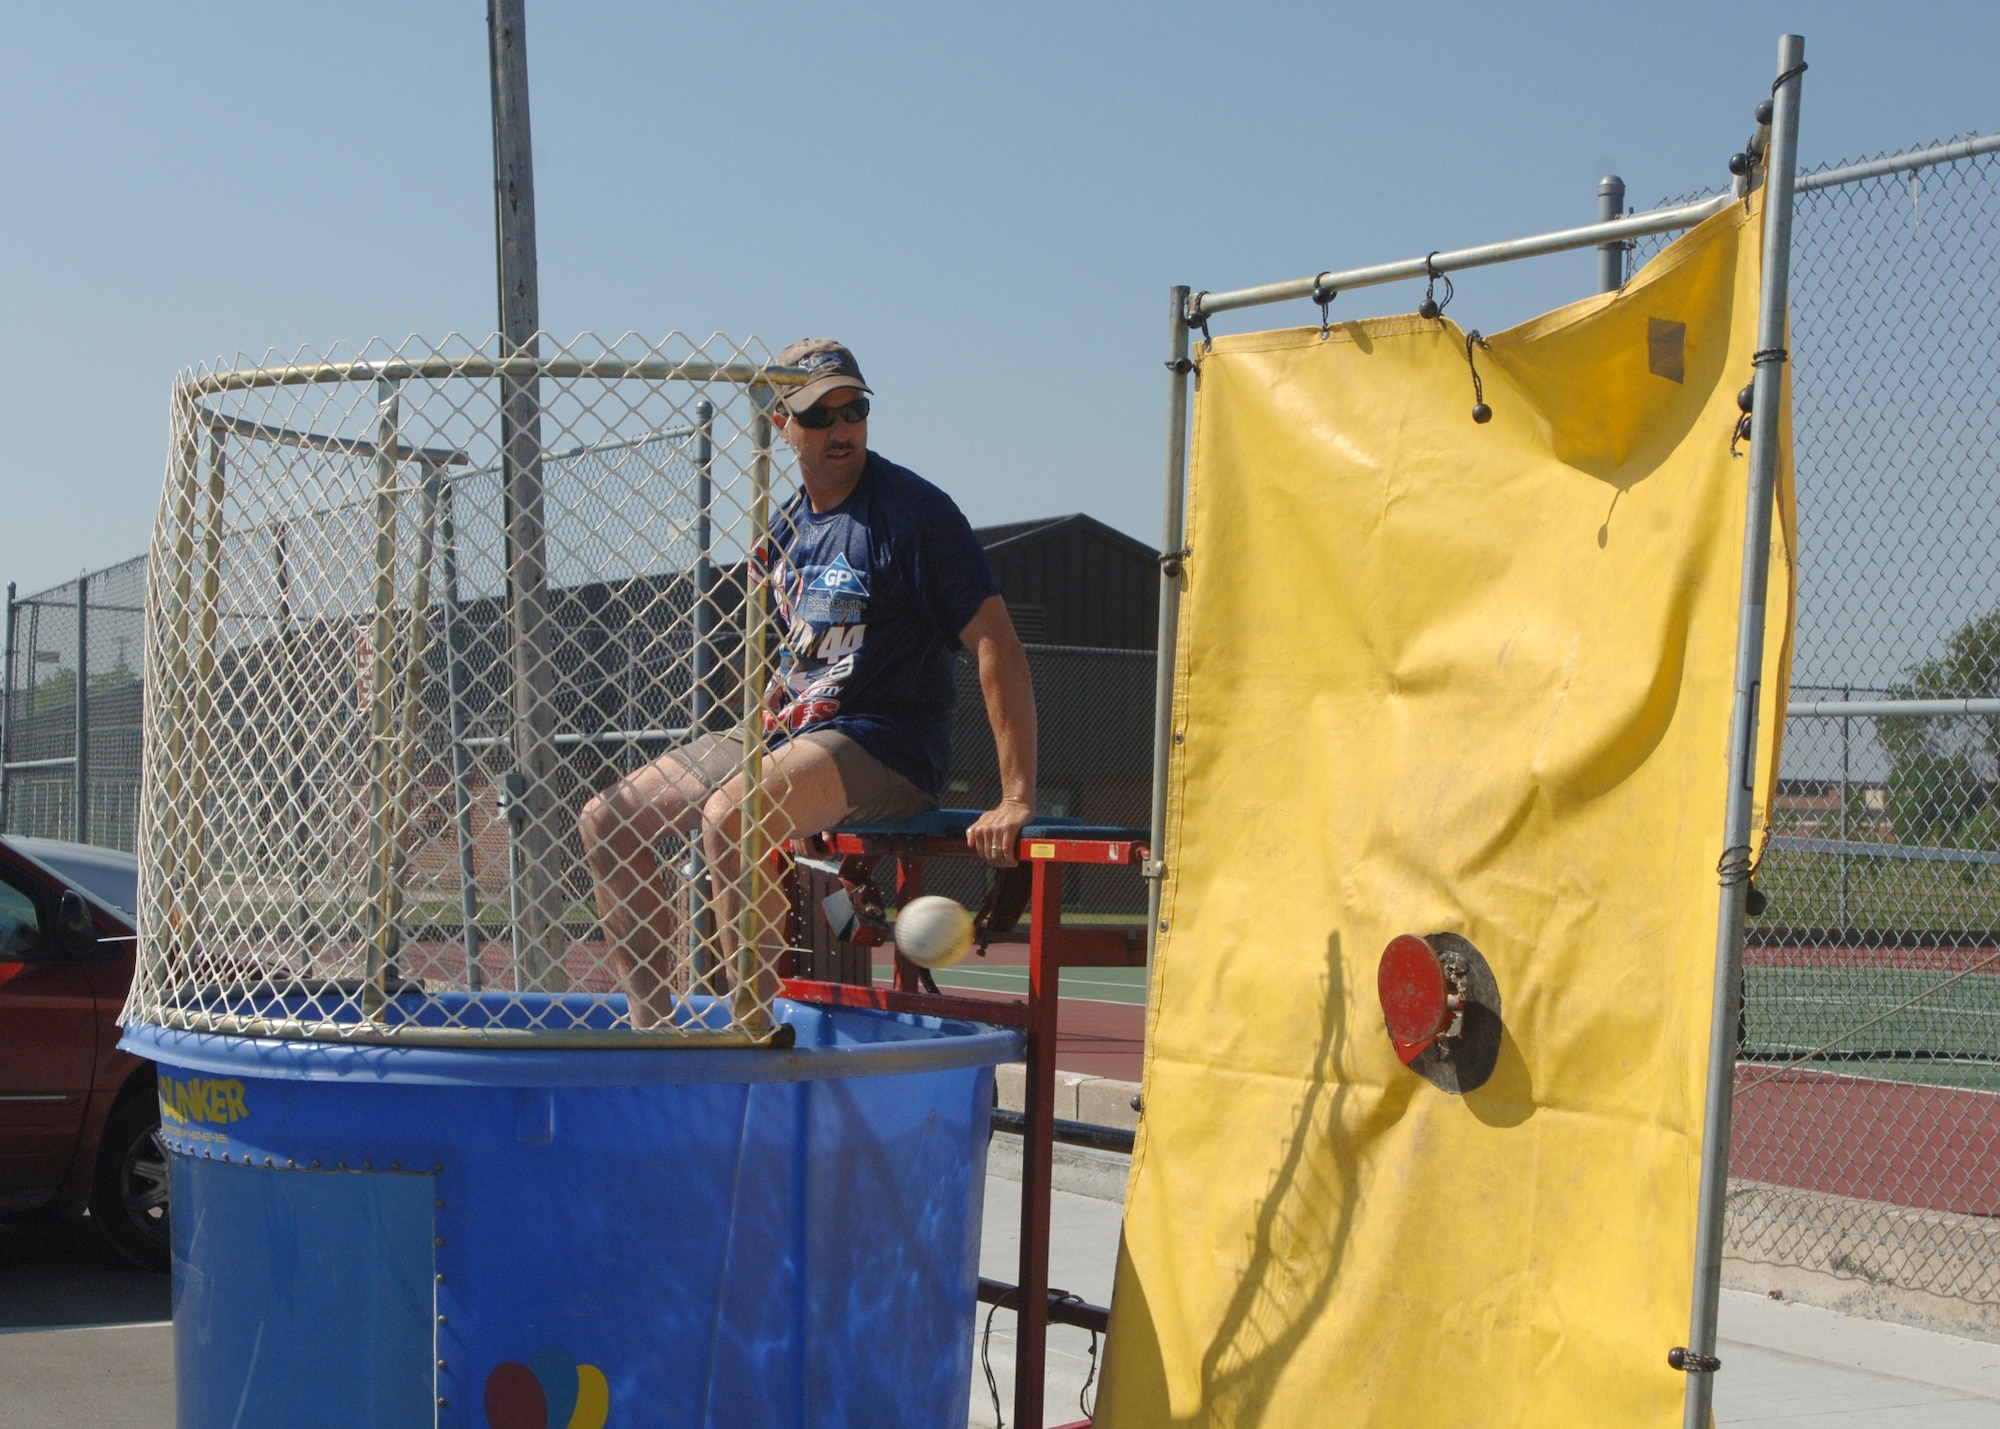 Chief Master Sgt. Jon Saiers, 319th Air Refueling Wing command chief, watches closely as a softball zeros in on its target, sending the chief into the vat of chilly water. Chief Saiers was one of many chiefs, as well as the wing commander and wing vice commander, that offered to take the plunge. The chief’s dunk tank occurred Aug. 15 to support the upcoming Air Force Ball. (U.S. Air Force photo/Airman 1st Class Chad Kellum)